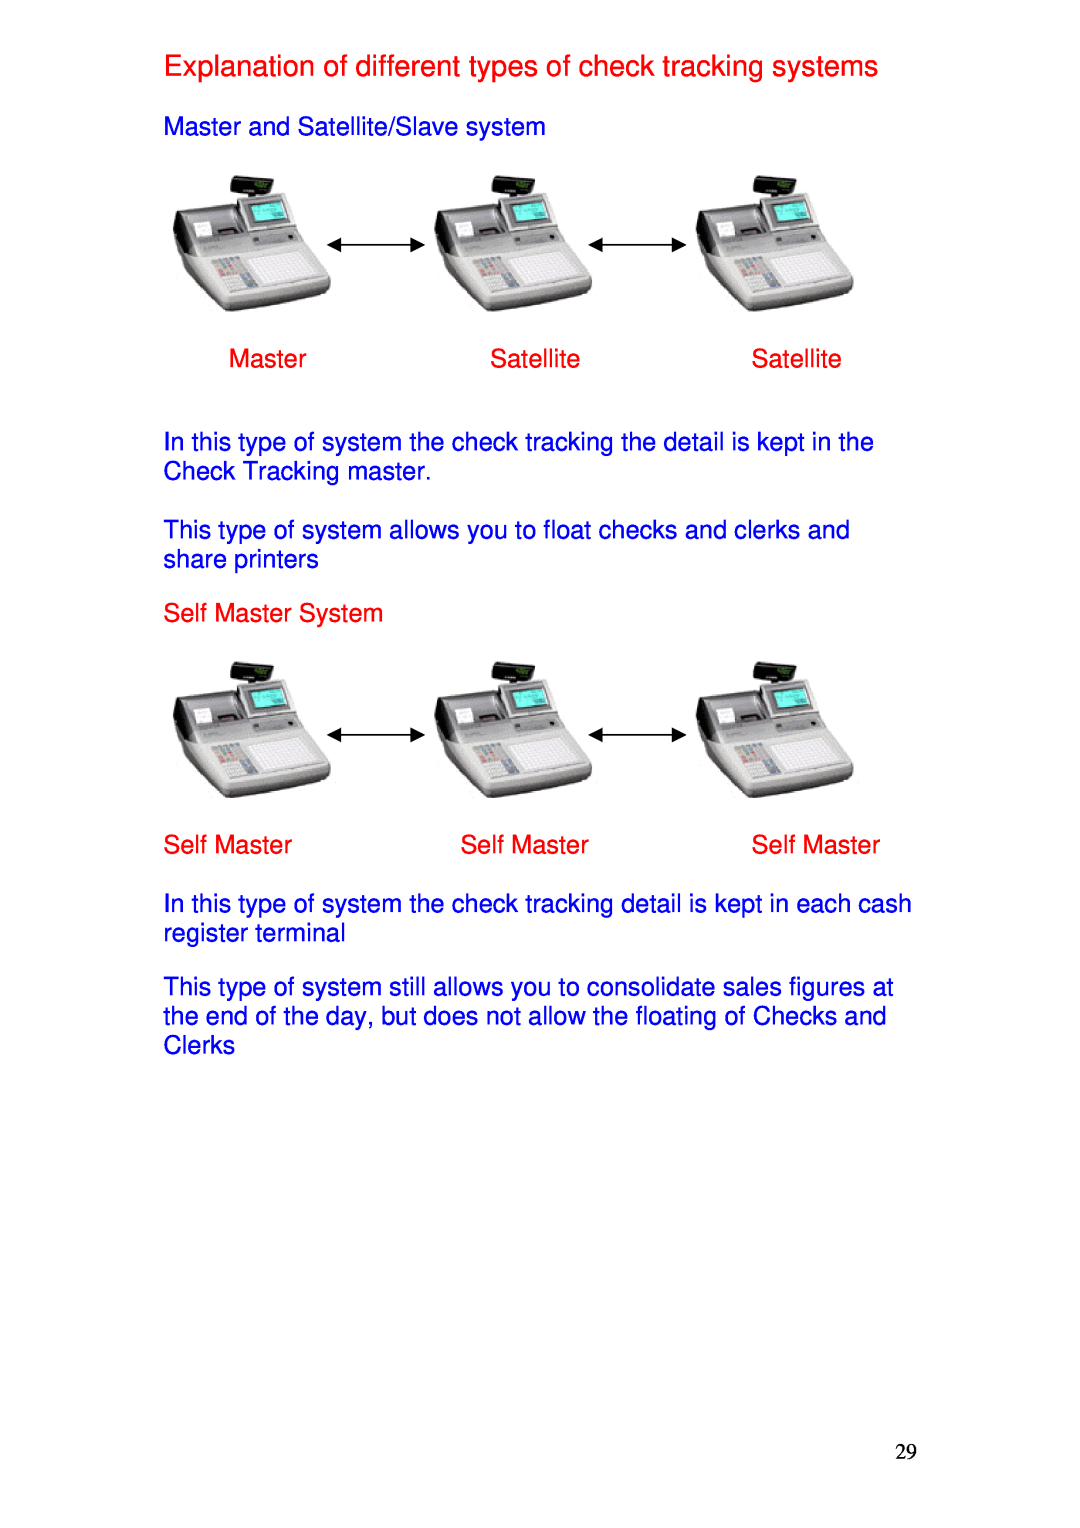 Delta TE-4000 Explanation of different types of check tracking systems, Master and Satellite/Slave system, Self Master 